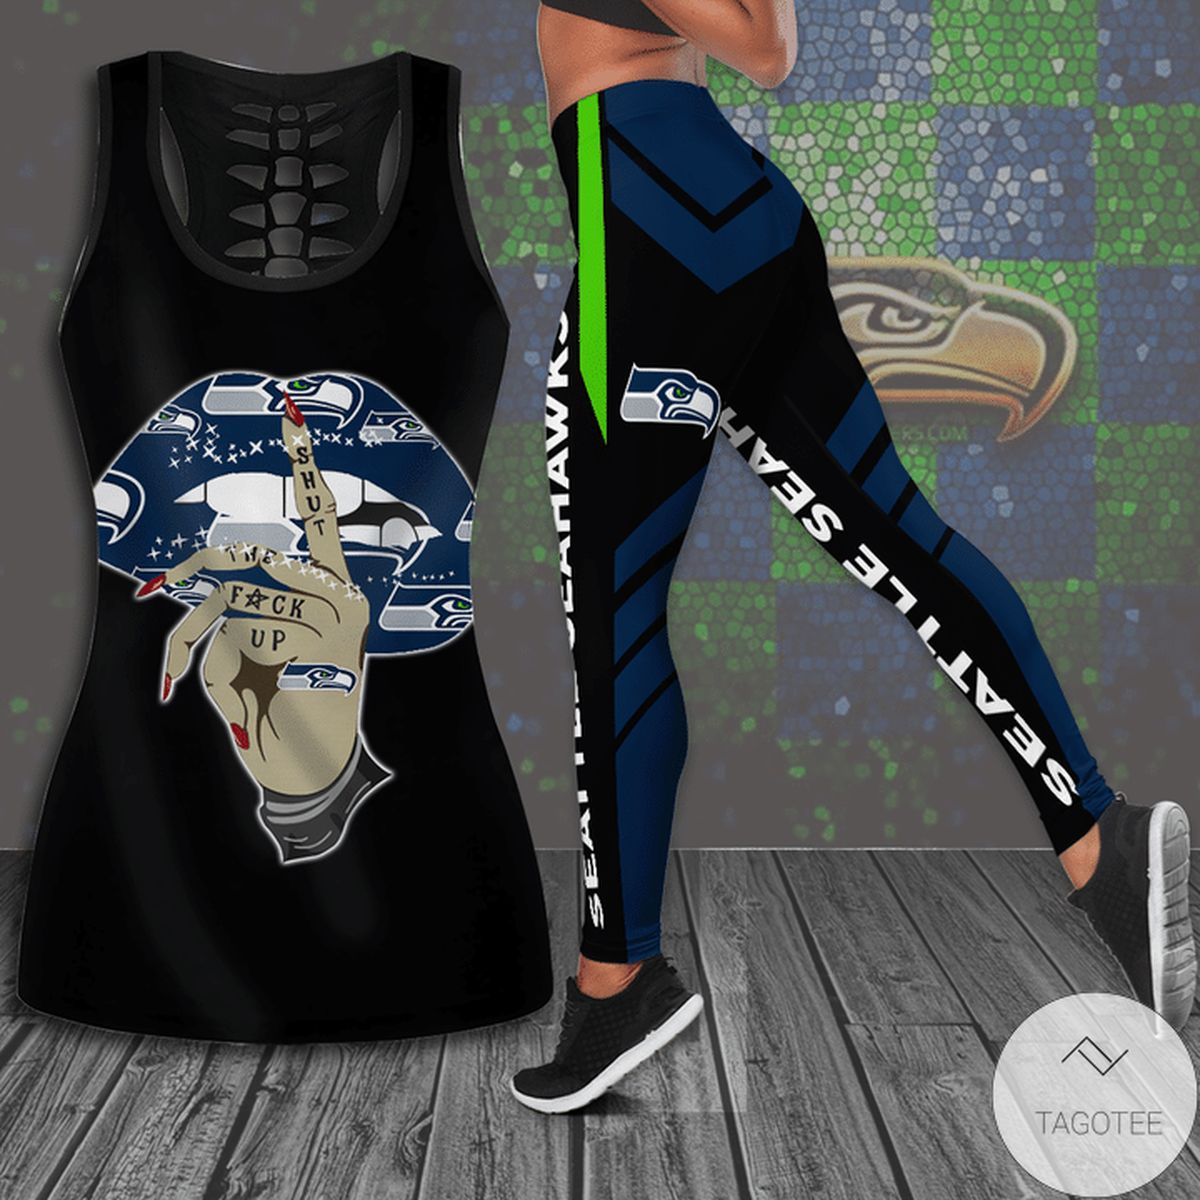 Seahawks Shut The F*ck Up Hallow Tank Top And Leggings